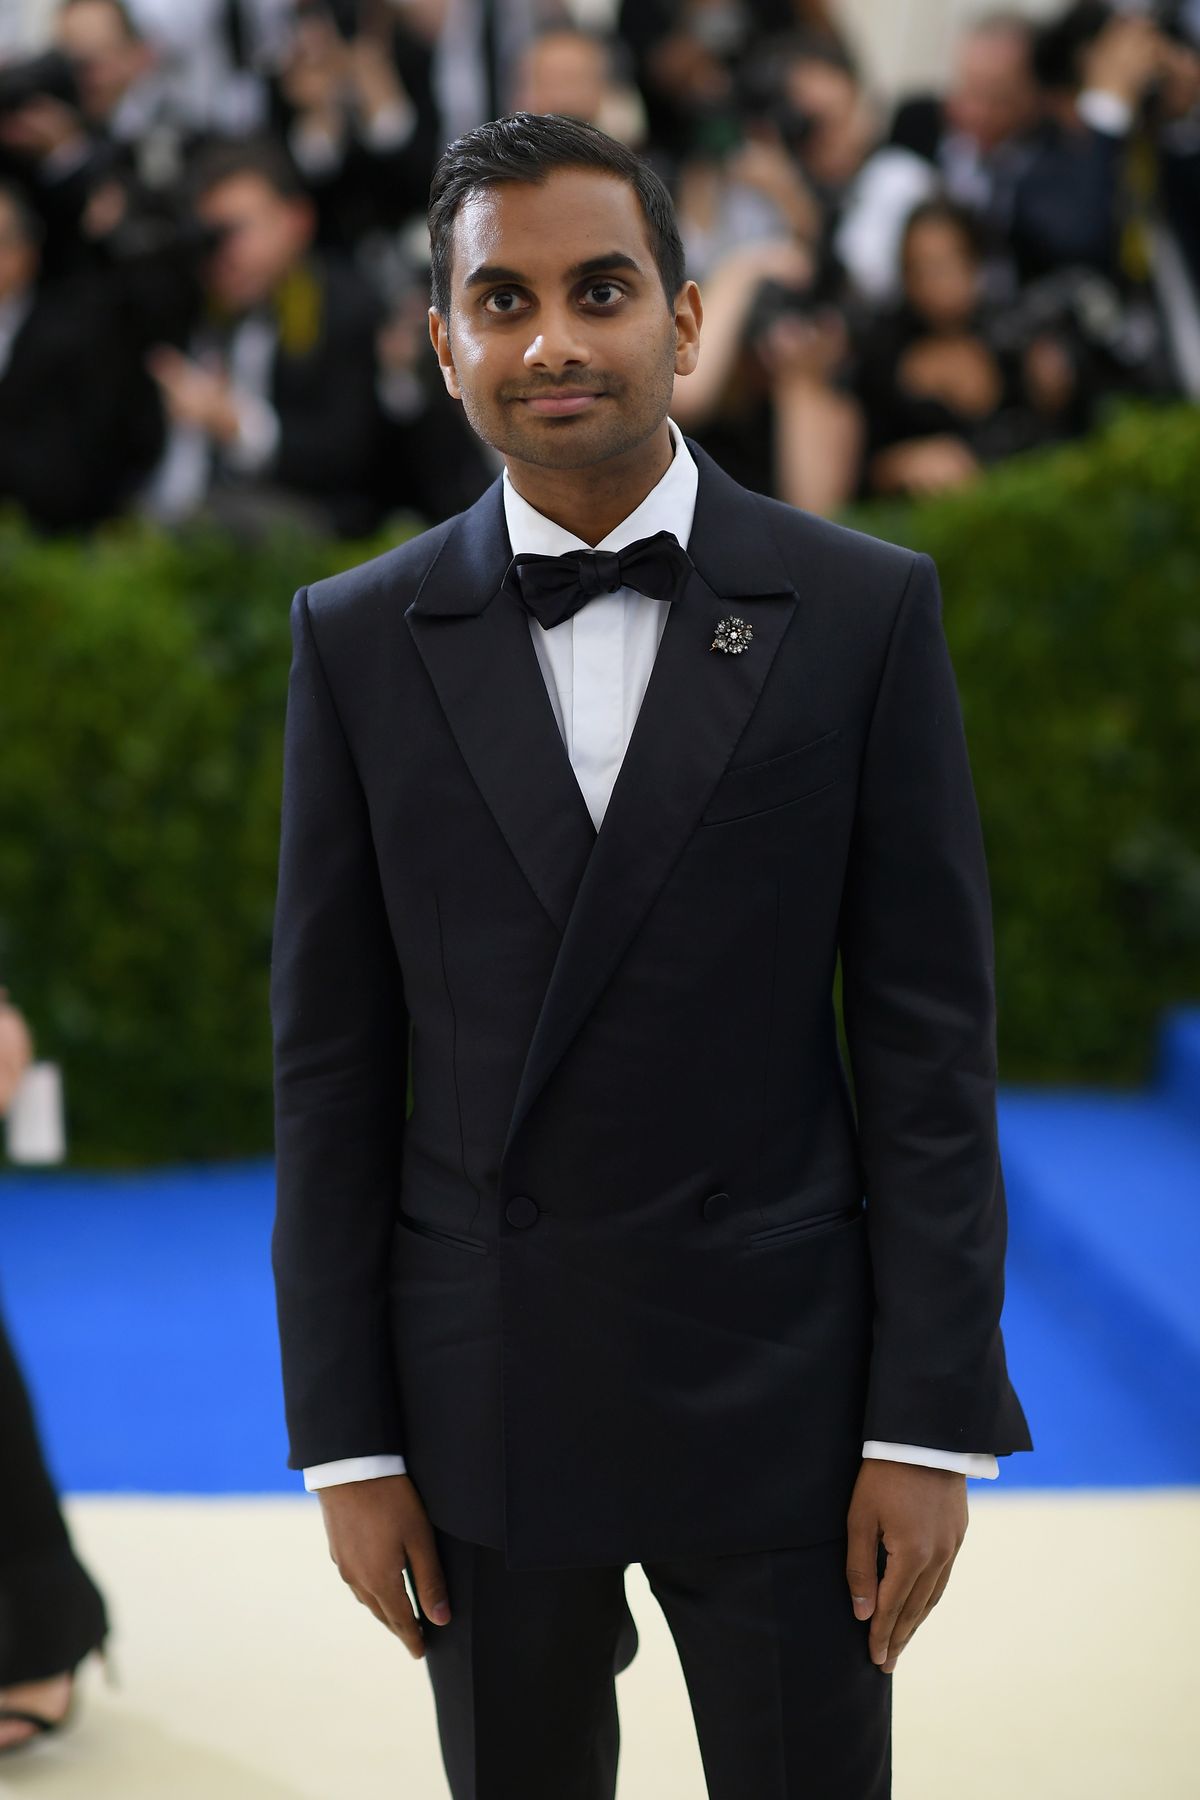 Aziz Ansari Addresses Sexual Misconduct Allegations Onstage at Show